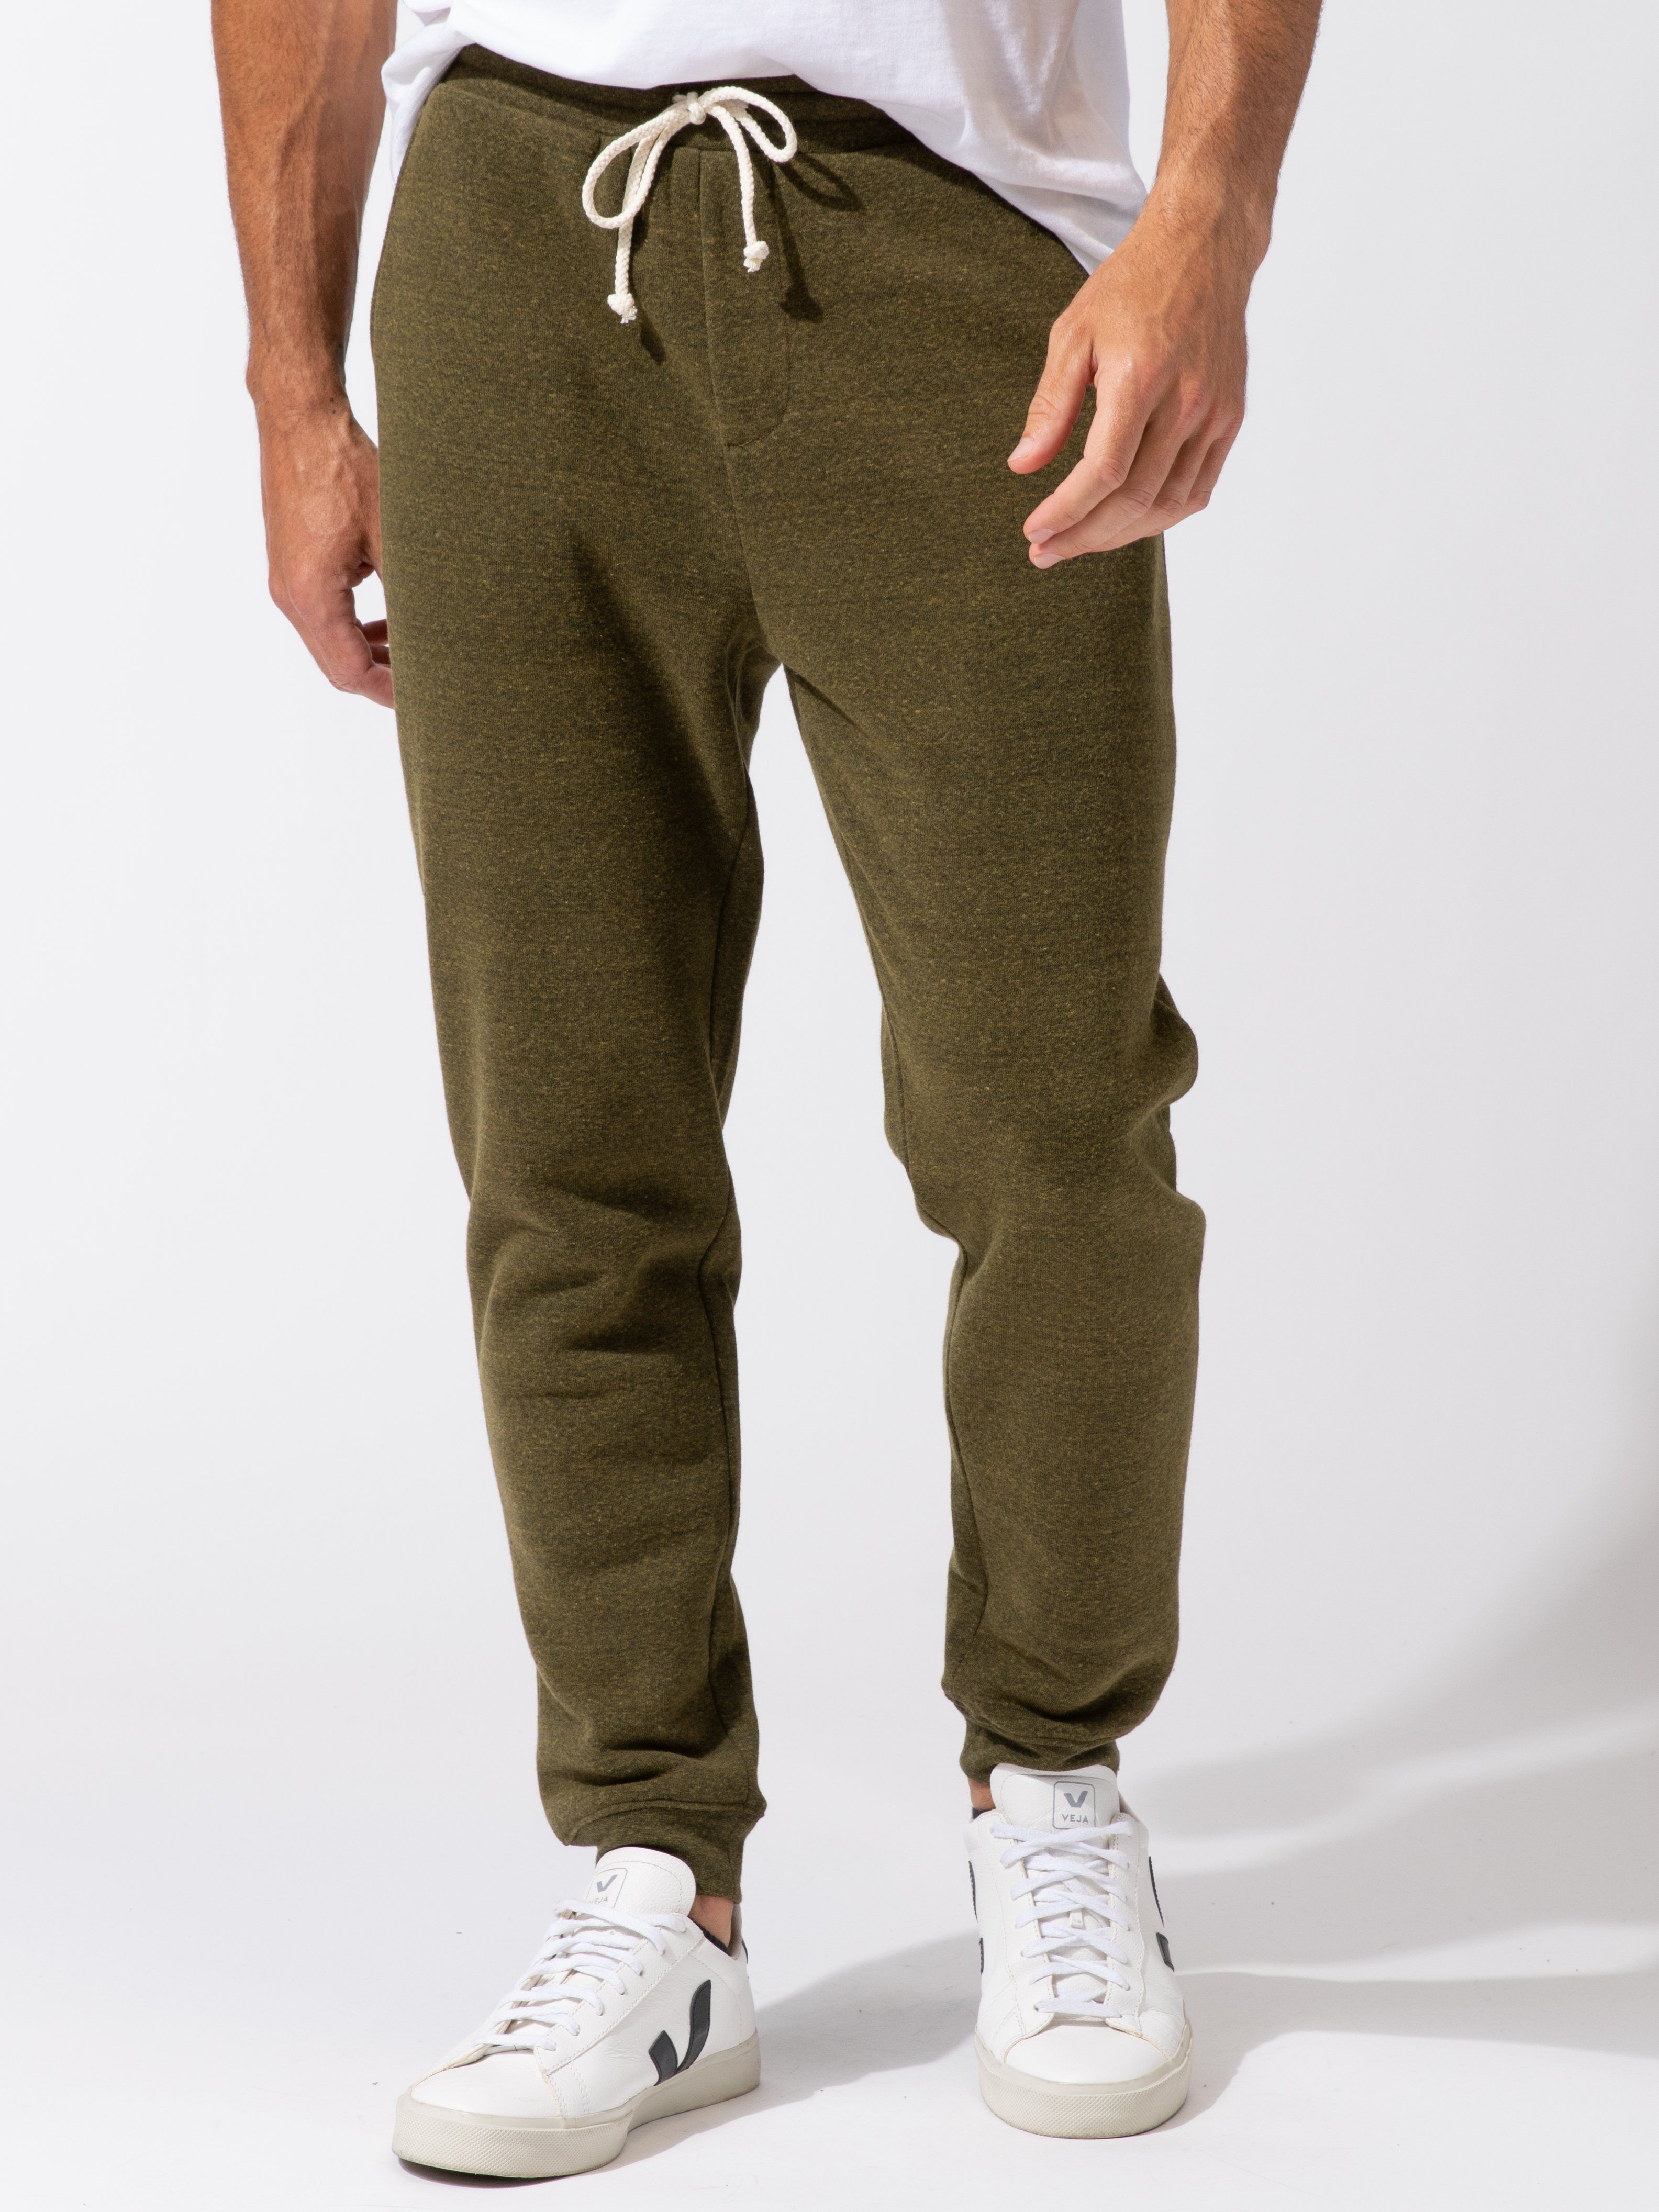 Triblend Slim Jogger in Midnight – Threads 4 Thought